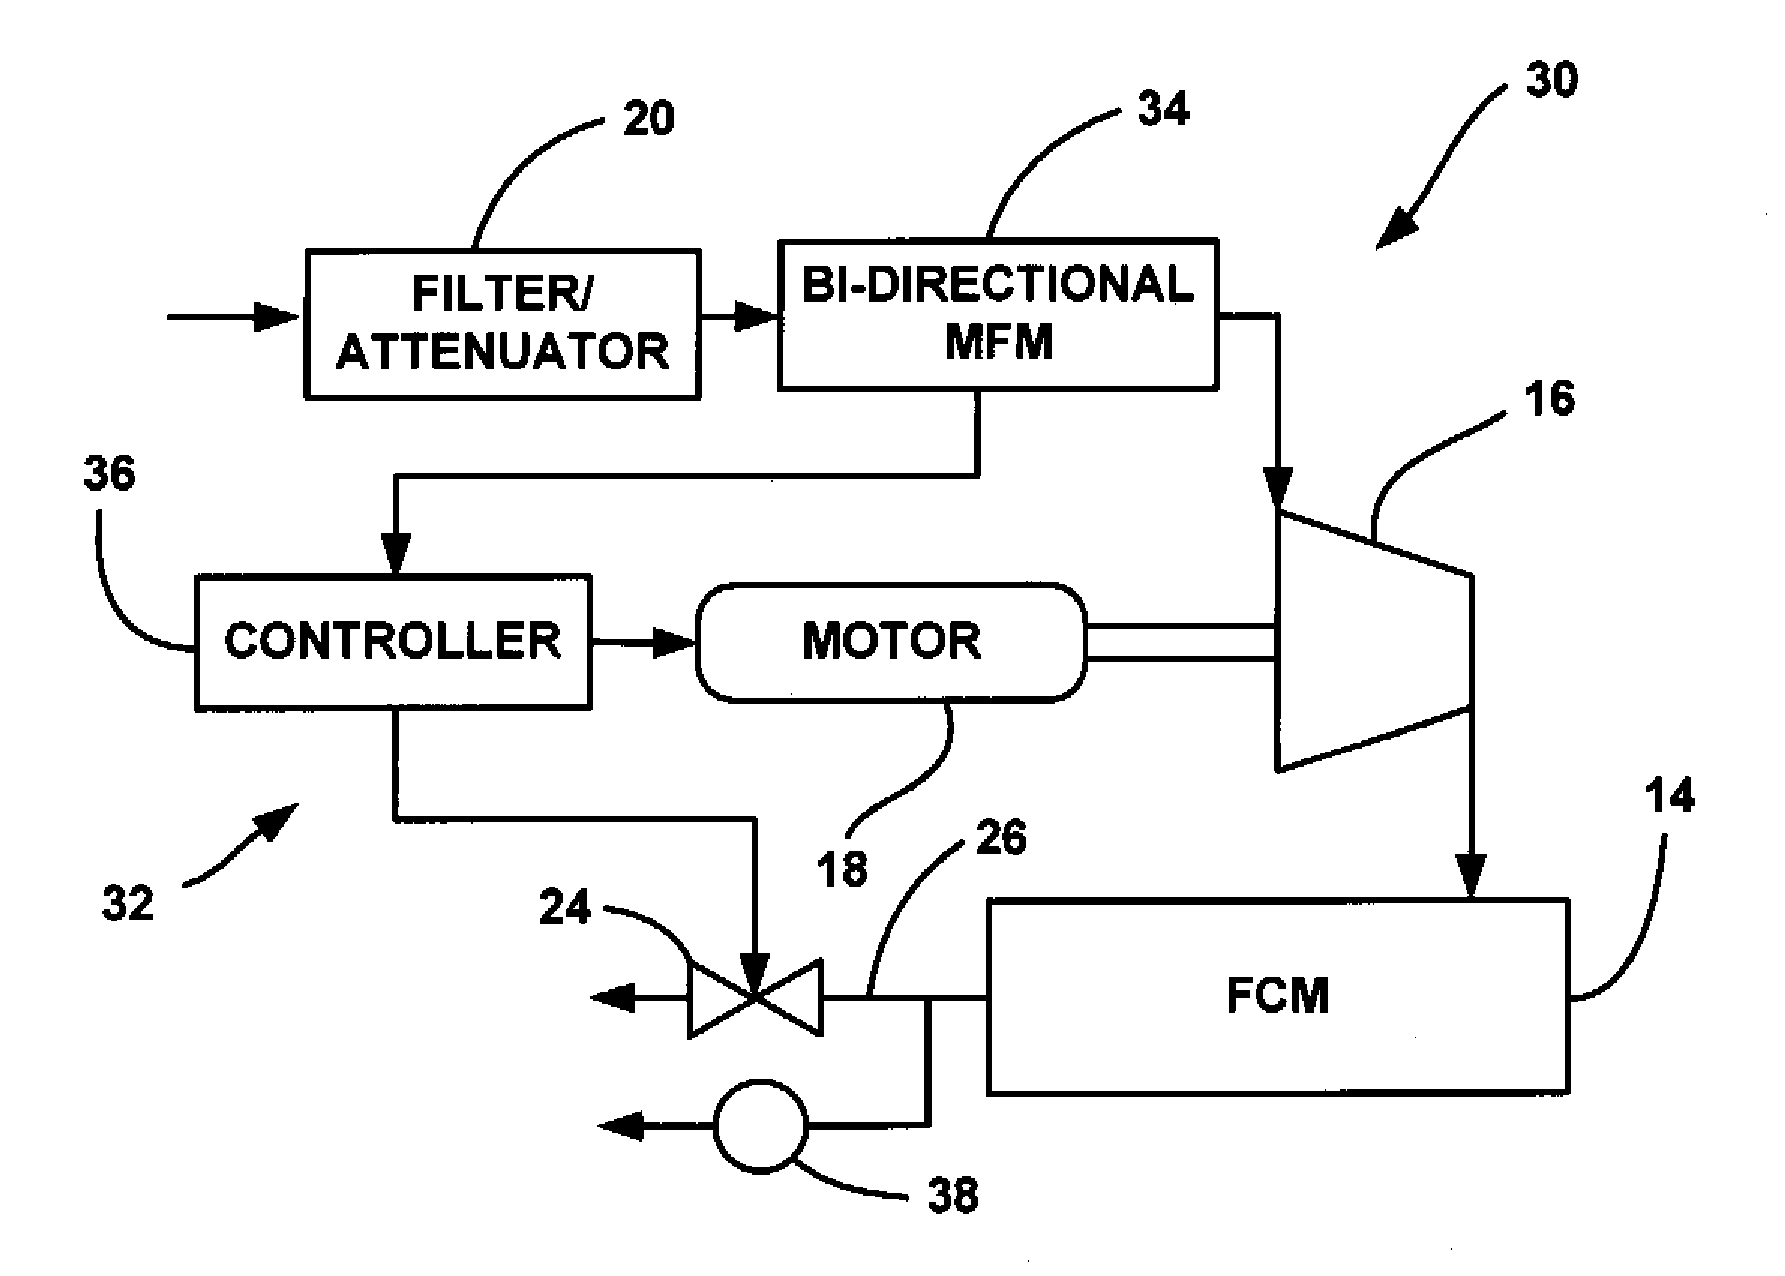 Method for Detecting Compressor Surge in a Fuel Cell System Using a Mass Flow Meter